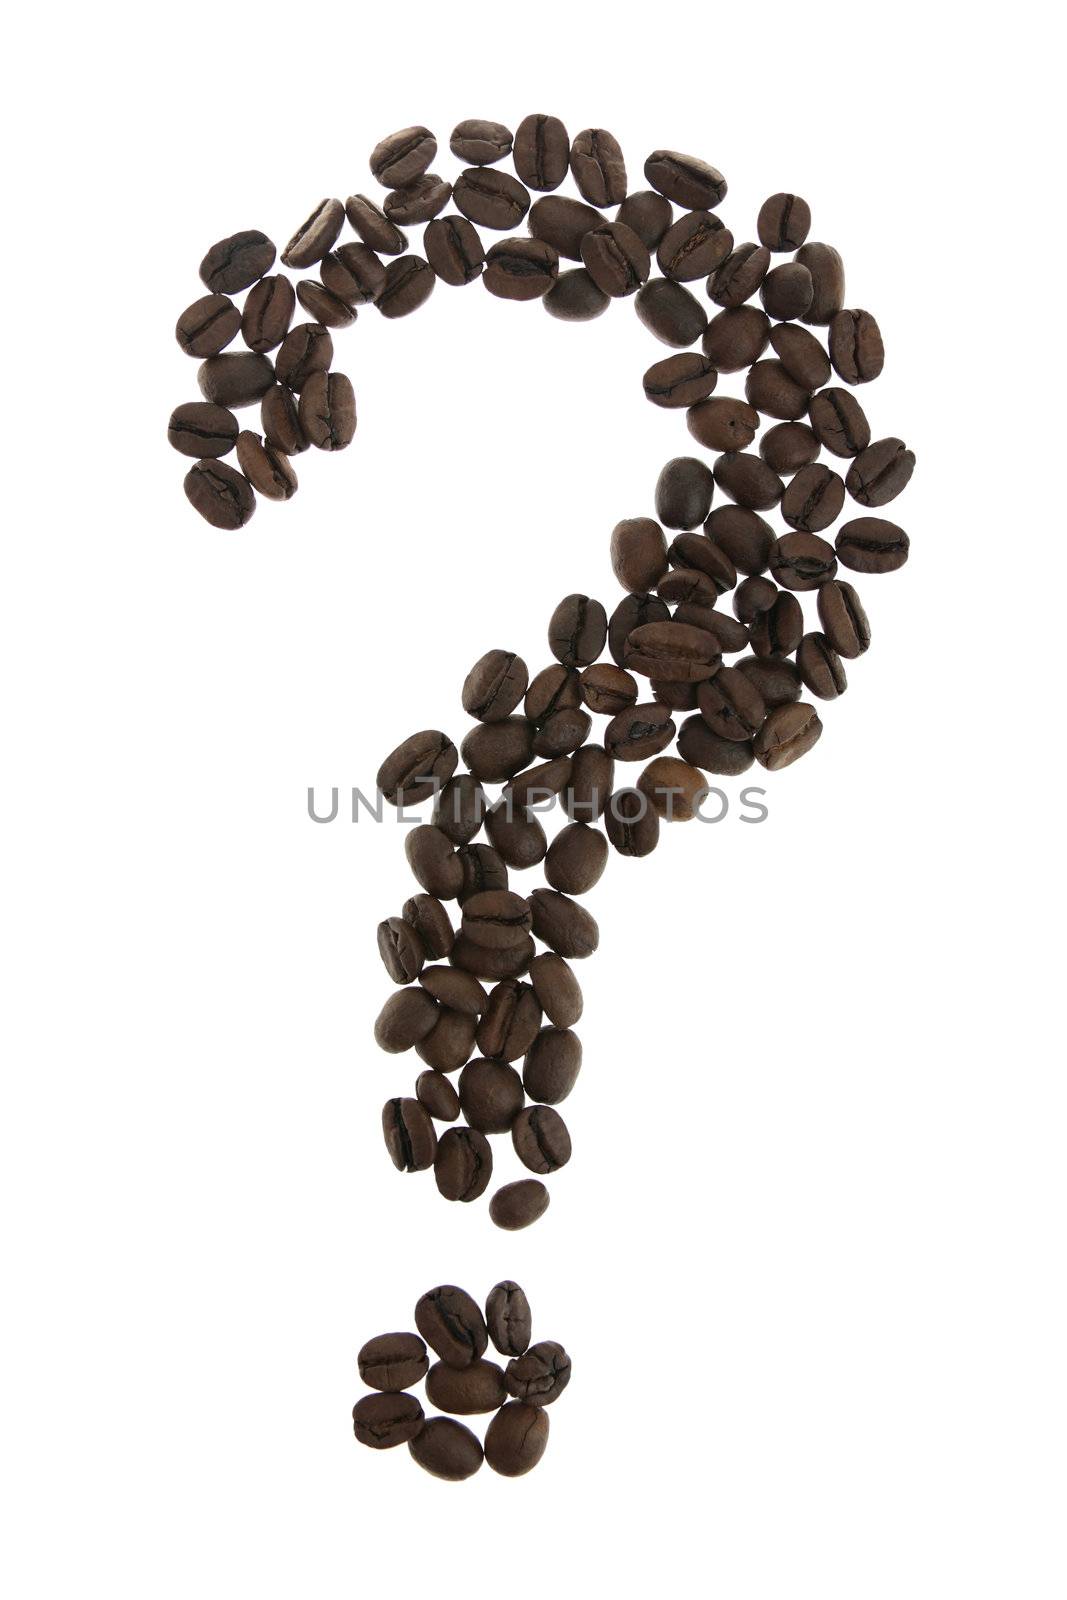 Coffe question mark isolated on white background